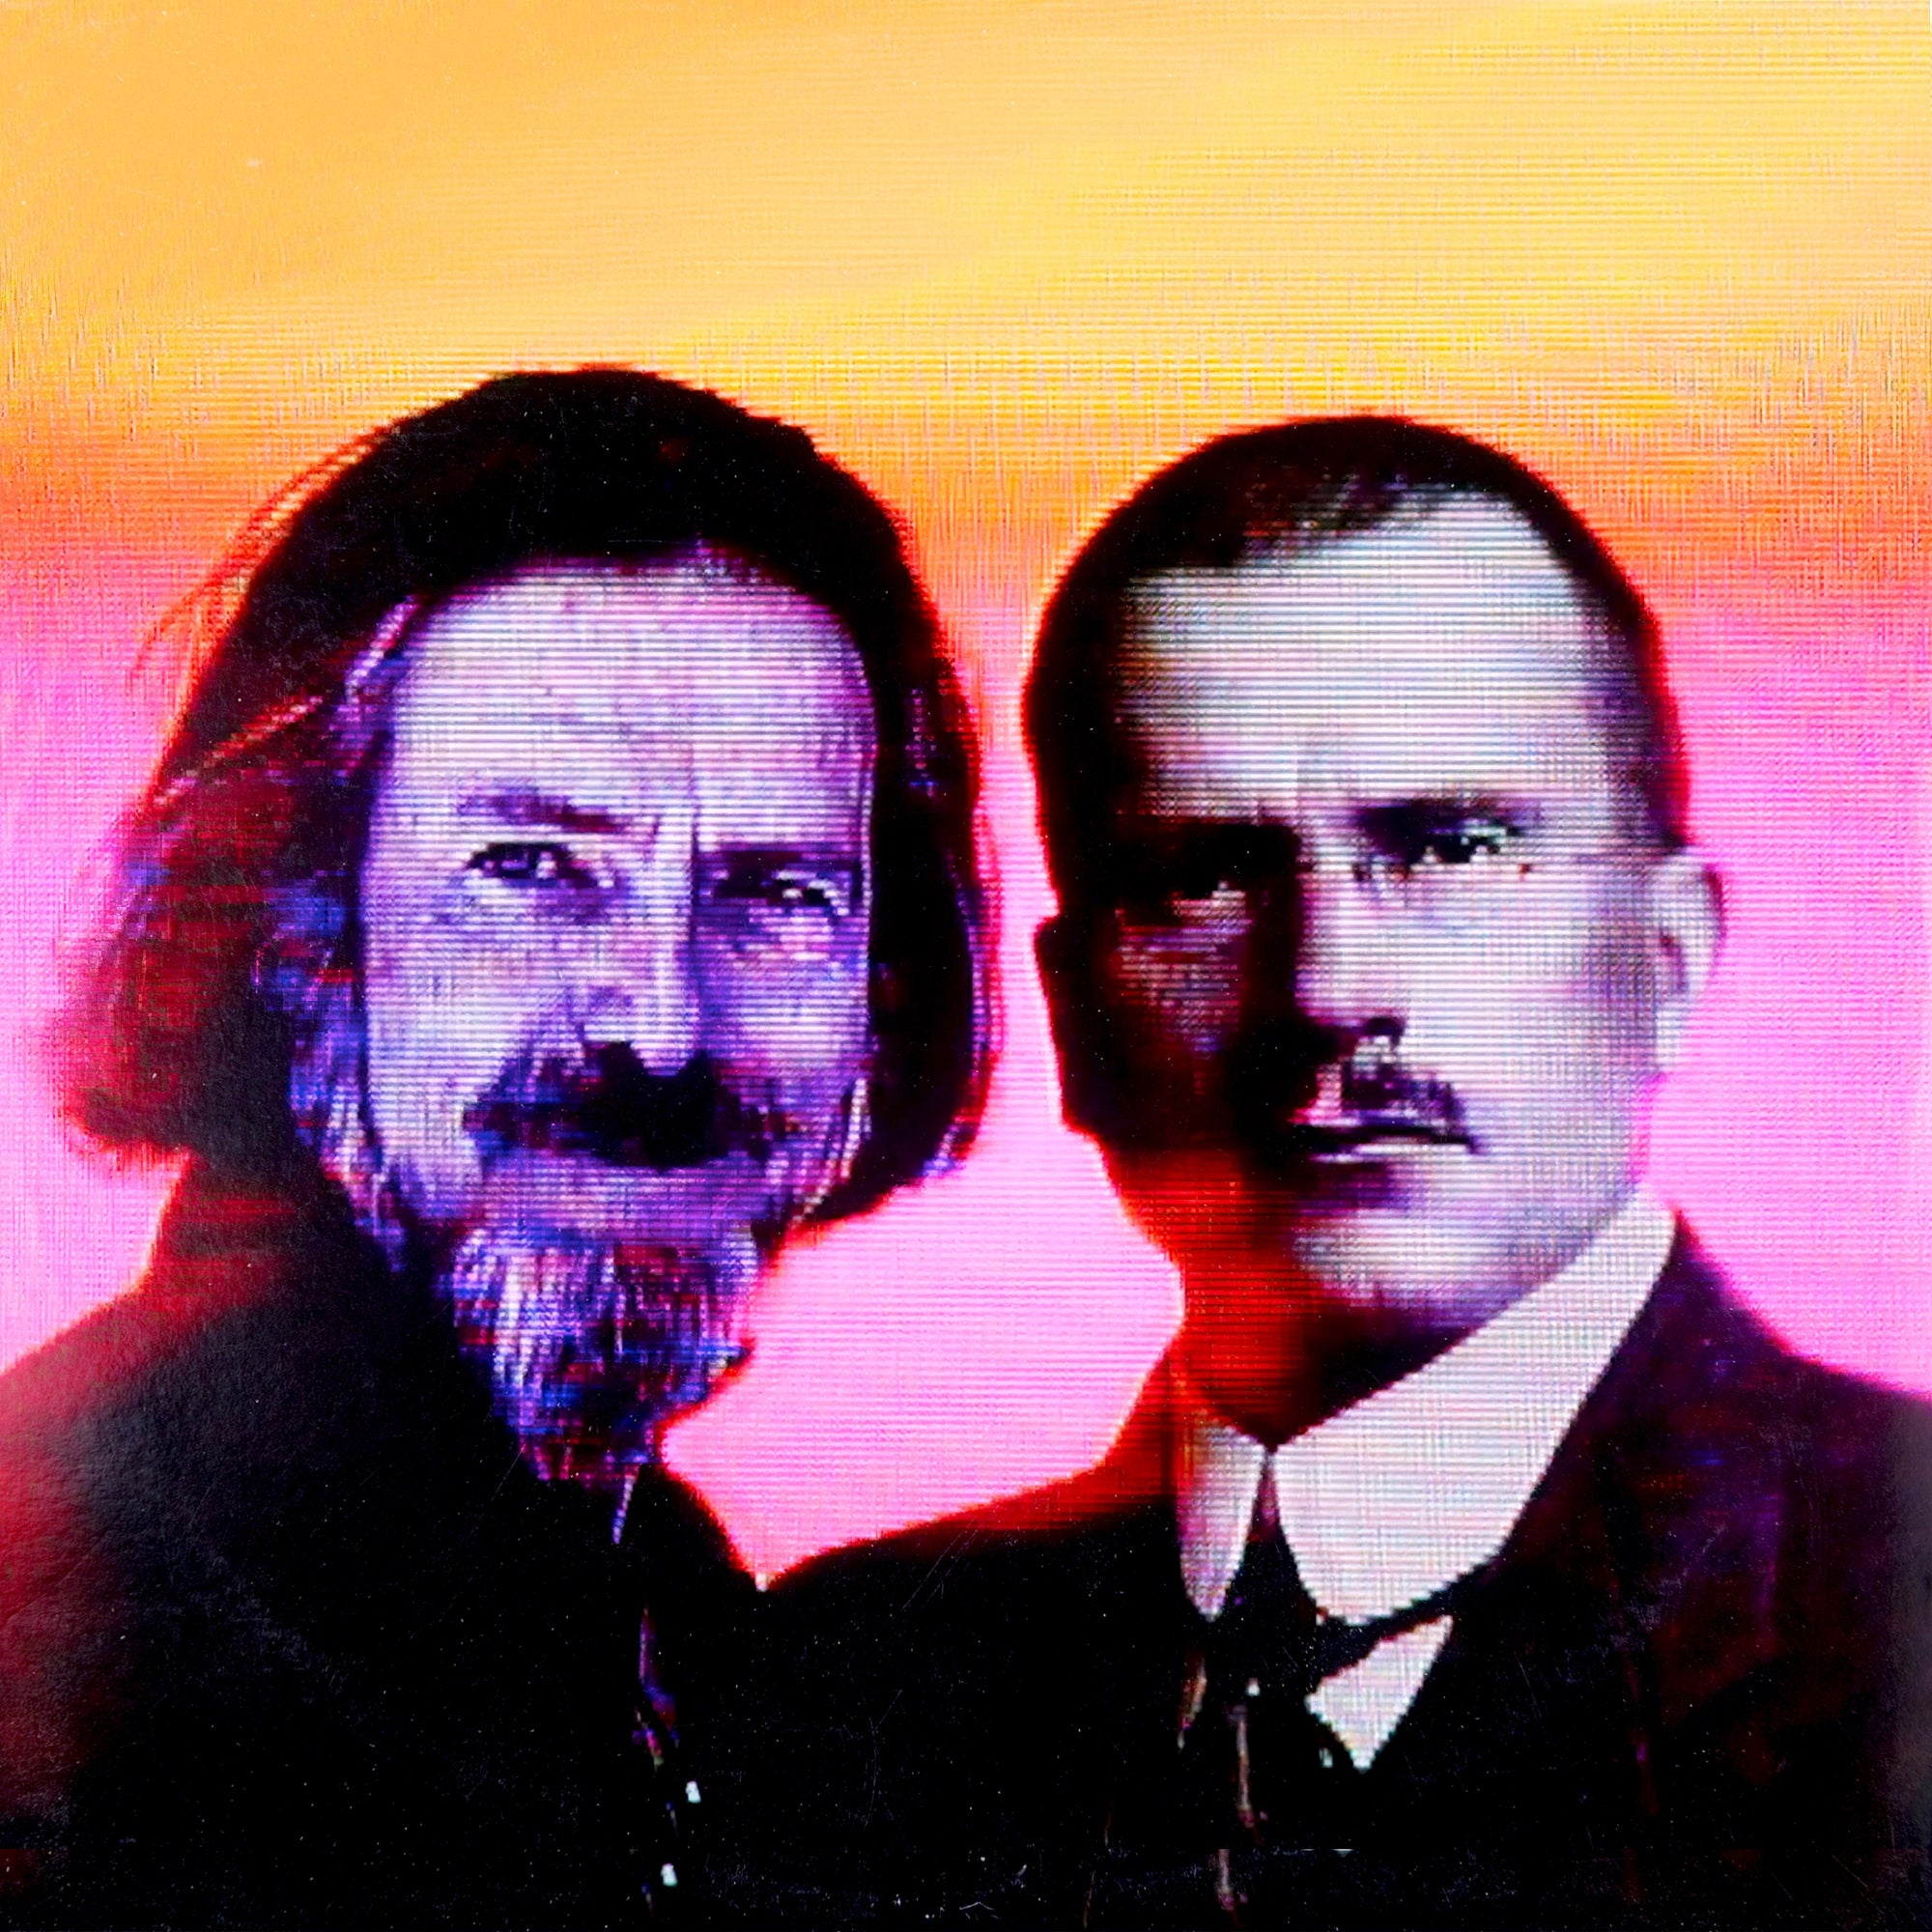 ＴＨＥ　ＷＯＬＦ　Ｅ．Ｐ. ft. Alan Watts X Carl Jung | Full EP & Visuals | This Week In Meaningwave December 30, 2022